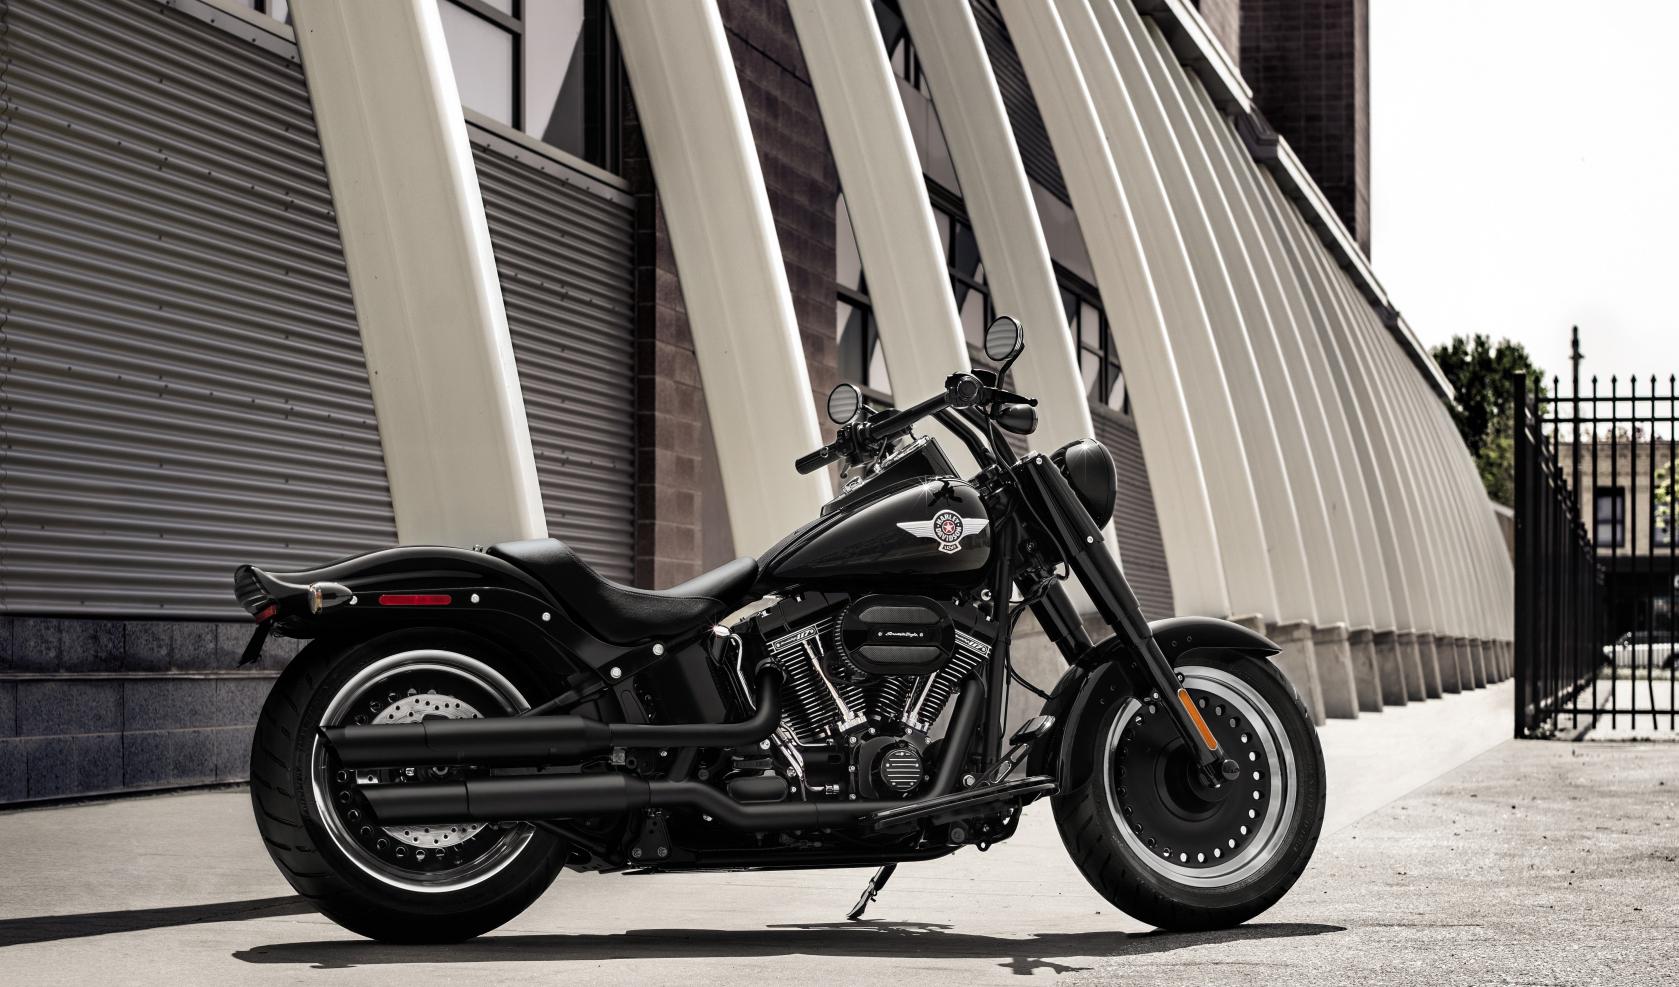 Harley Davidson Photo Of The Day 17 Custom Hdfatboy S Photooftheday T Co Hmjhq0ybyn T Co Wcqfnvfhfs Twitter